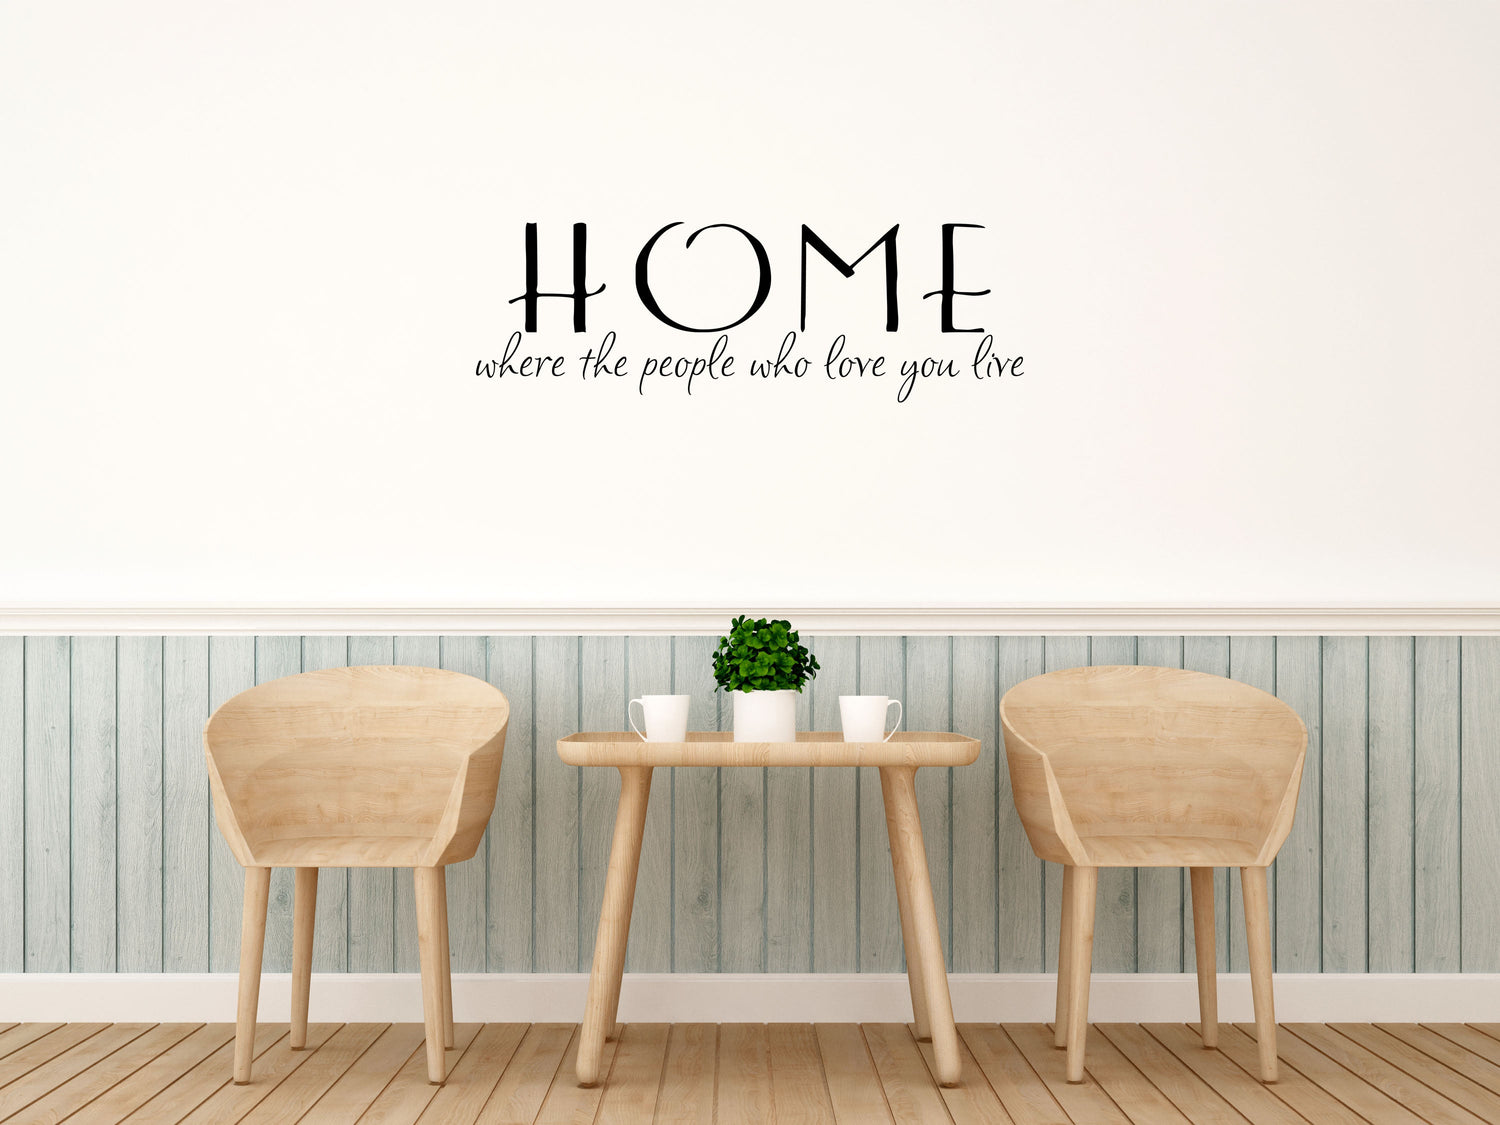 Care Home Wall Quote, Our Residents.., Wall Art Sticker, Vinyl